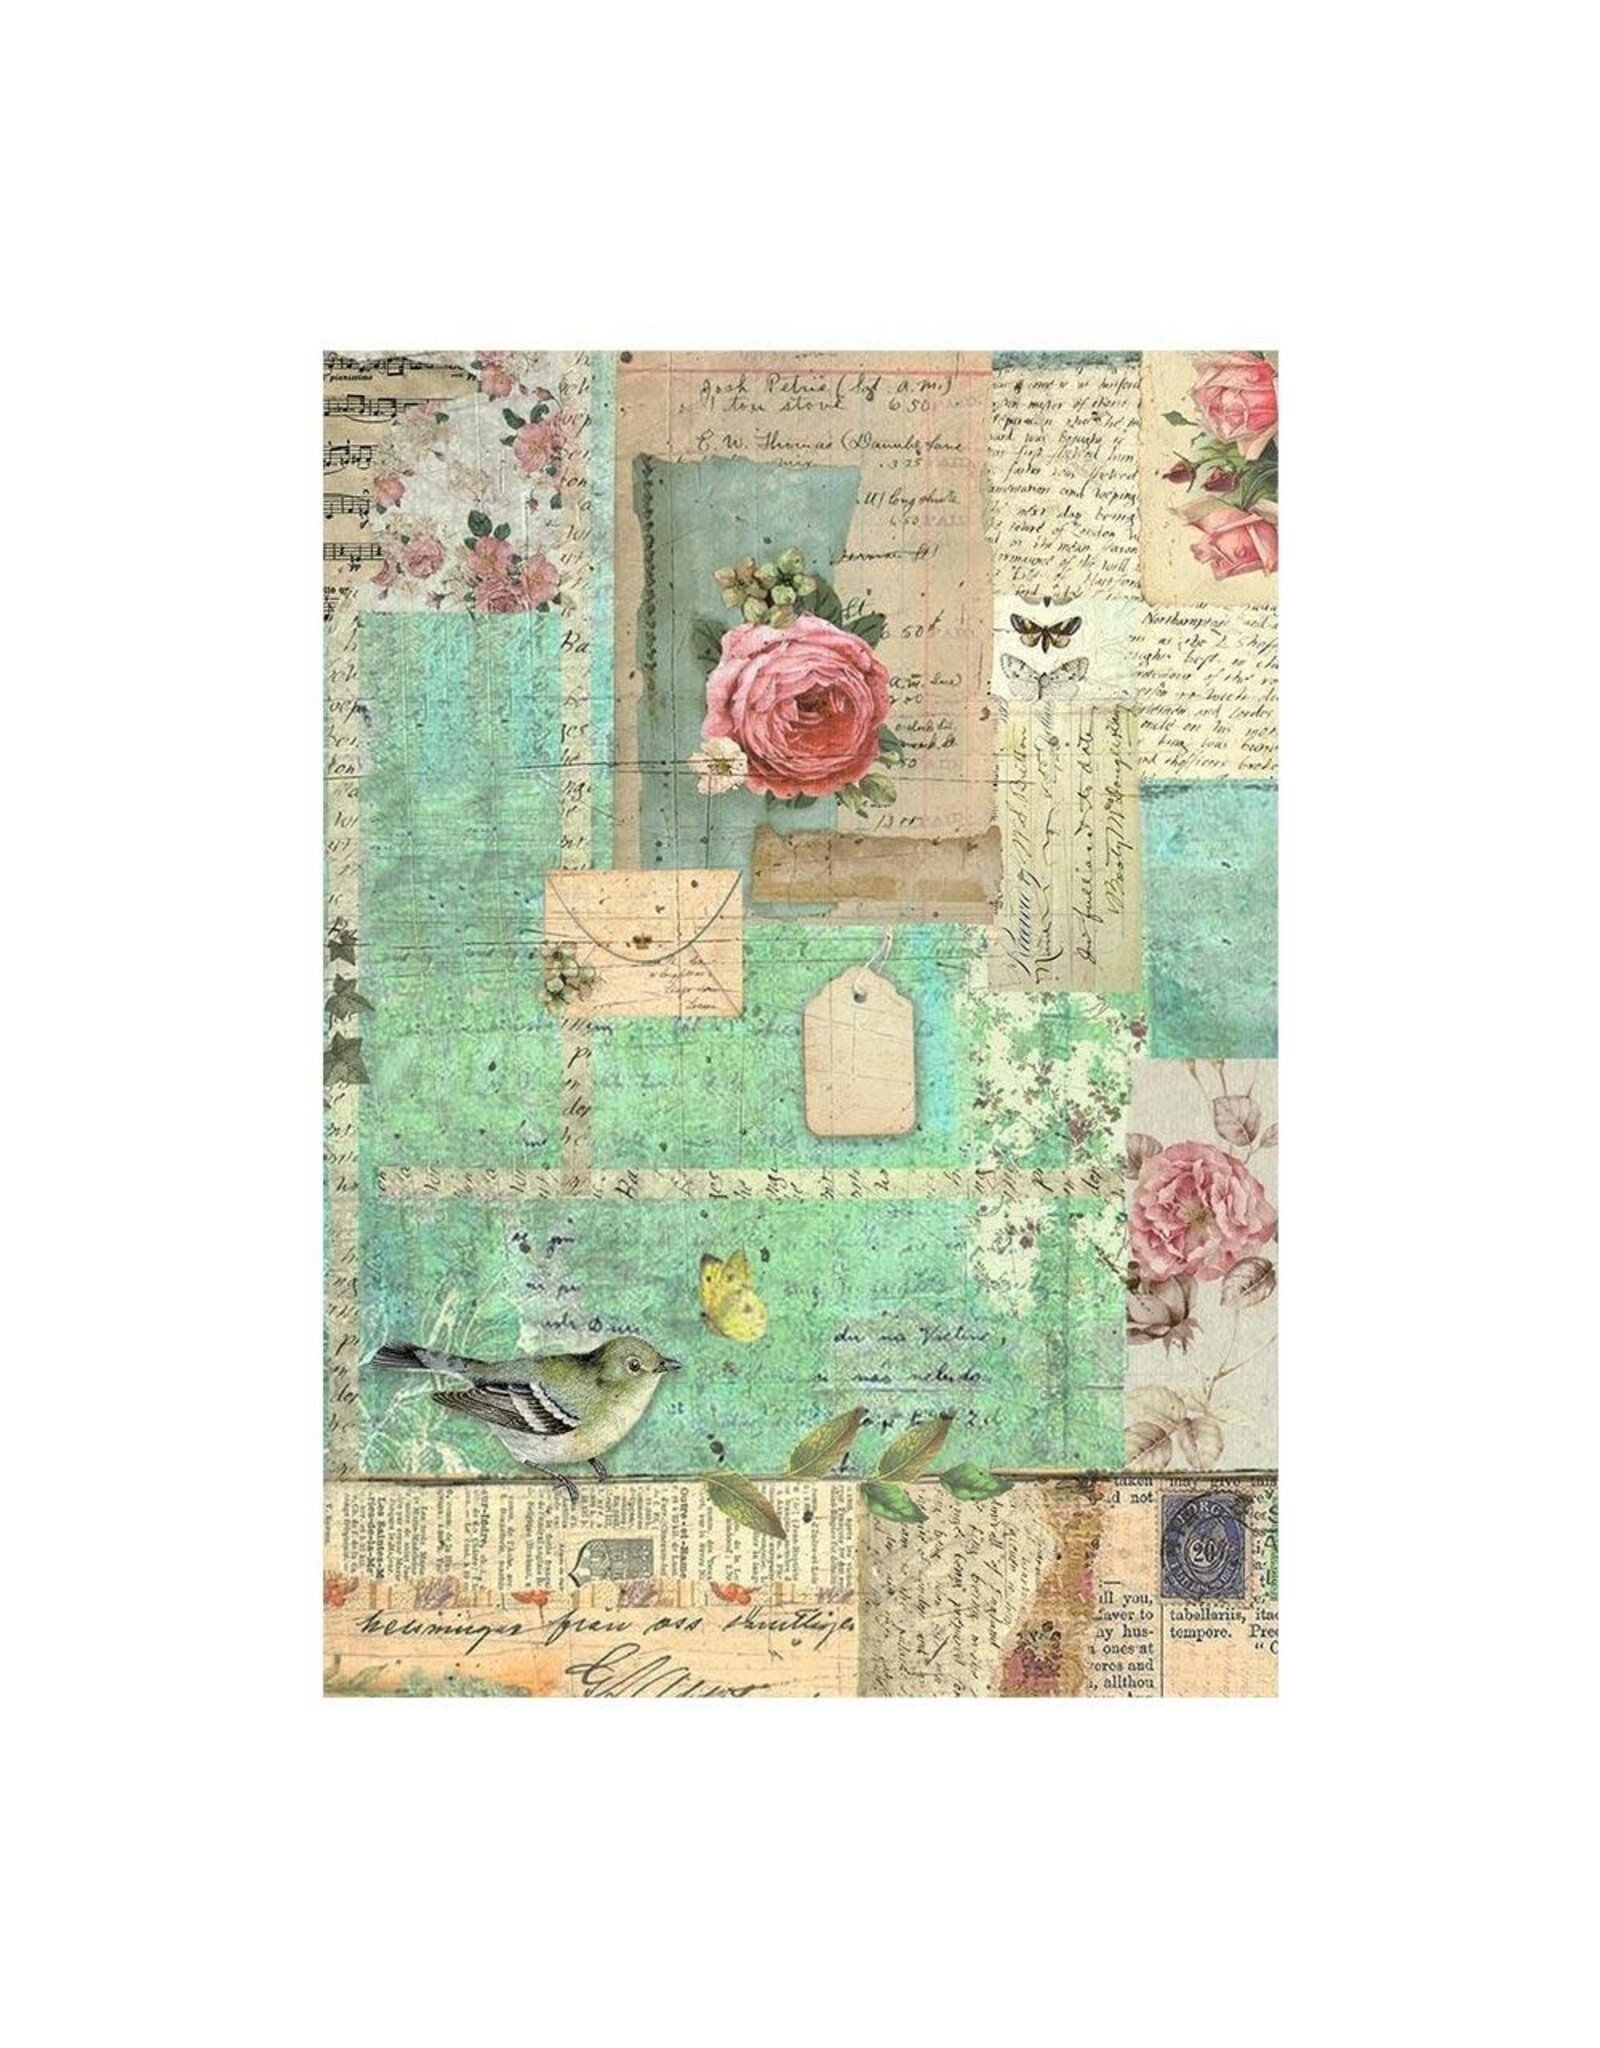 STAMPERIA STAMPERIA GARDEN ASSORTED A6 RICE PAPER DECOUPAGE BACKGROUNDS 10.5X14.8CM 8/PK